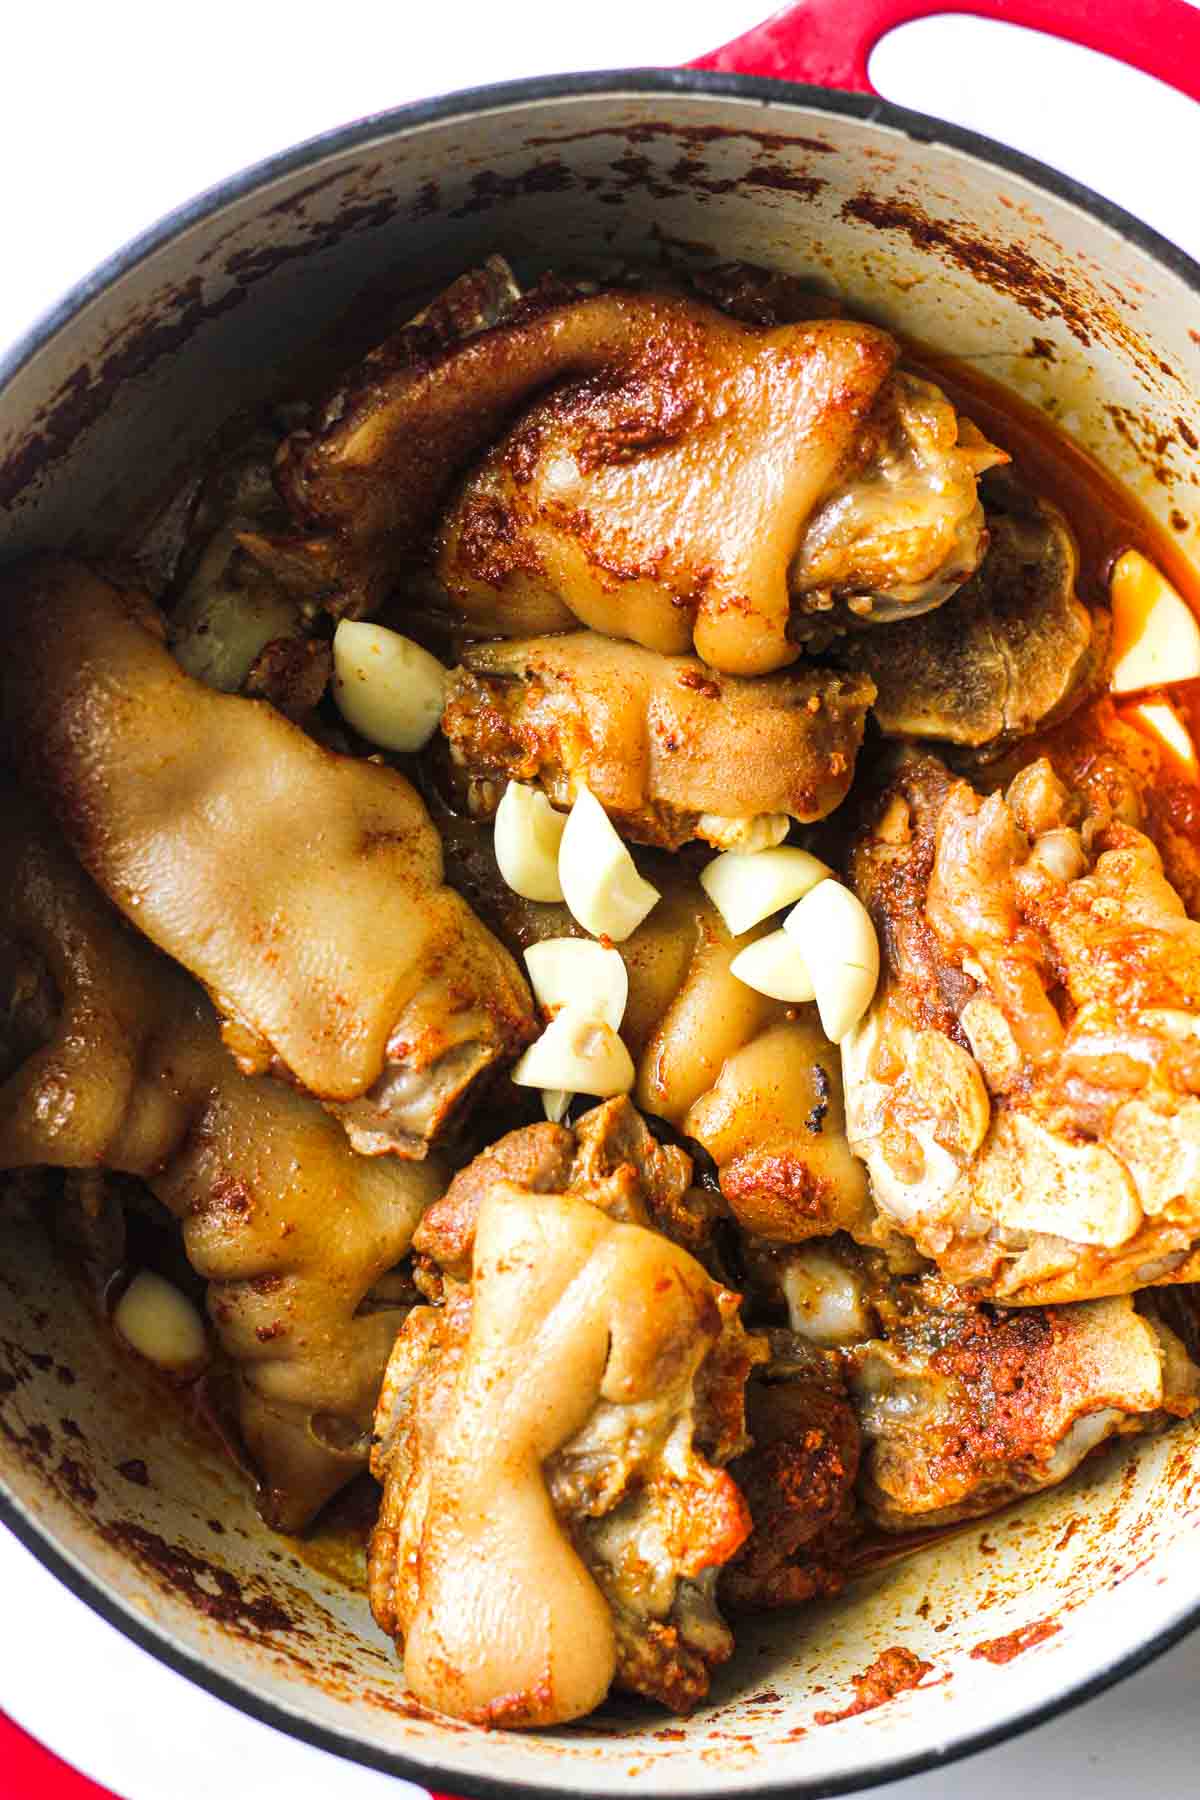 Pig feet stew recipe The Top Meal